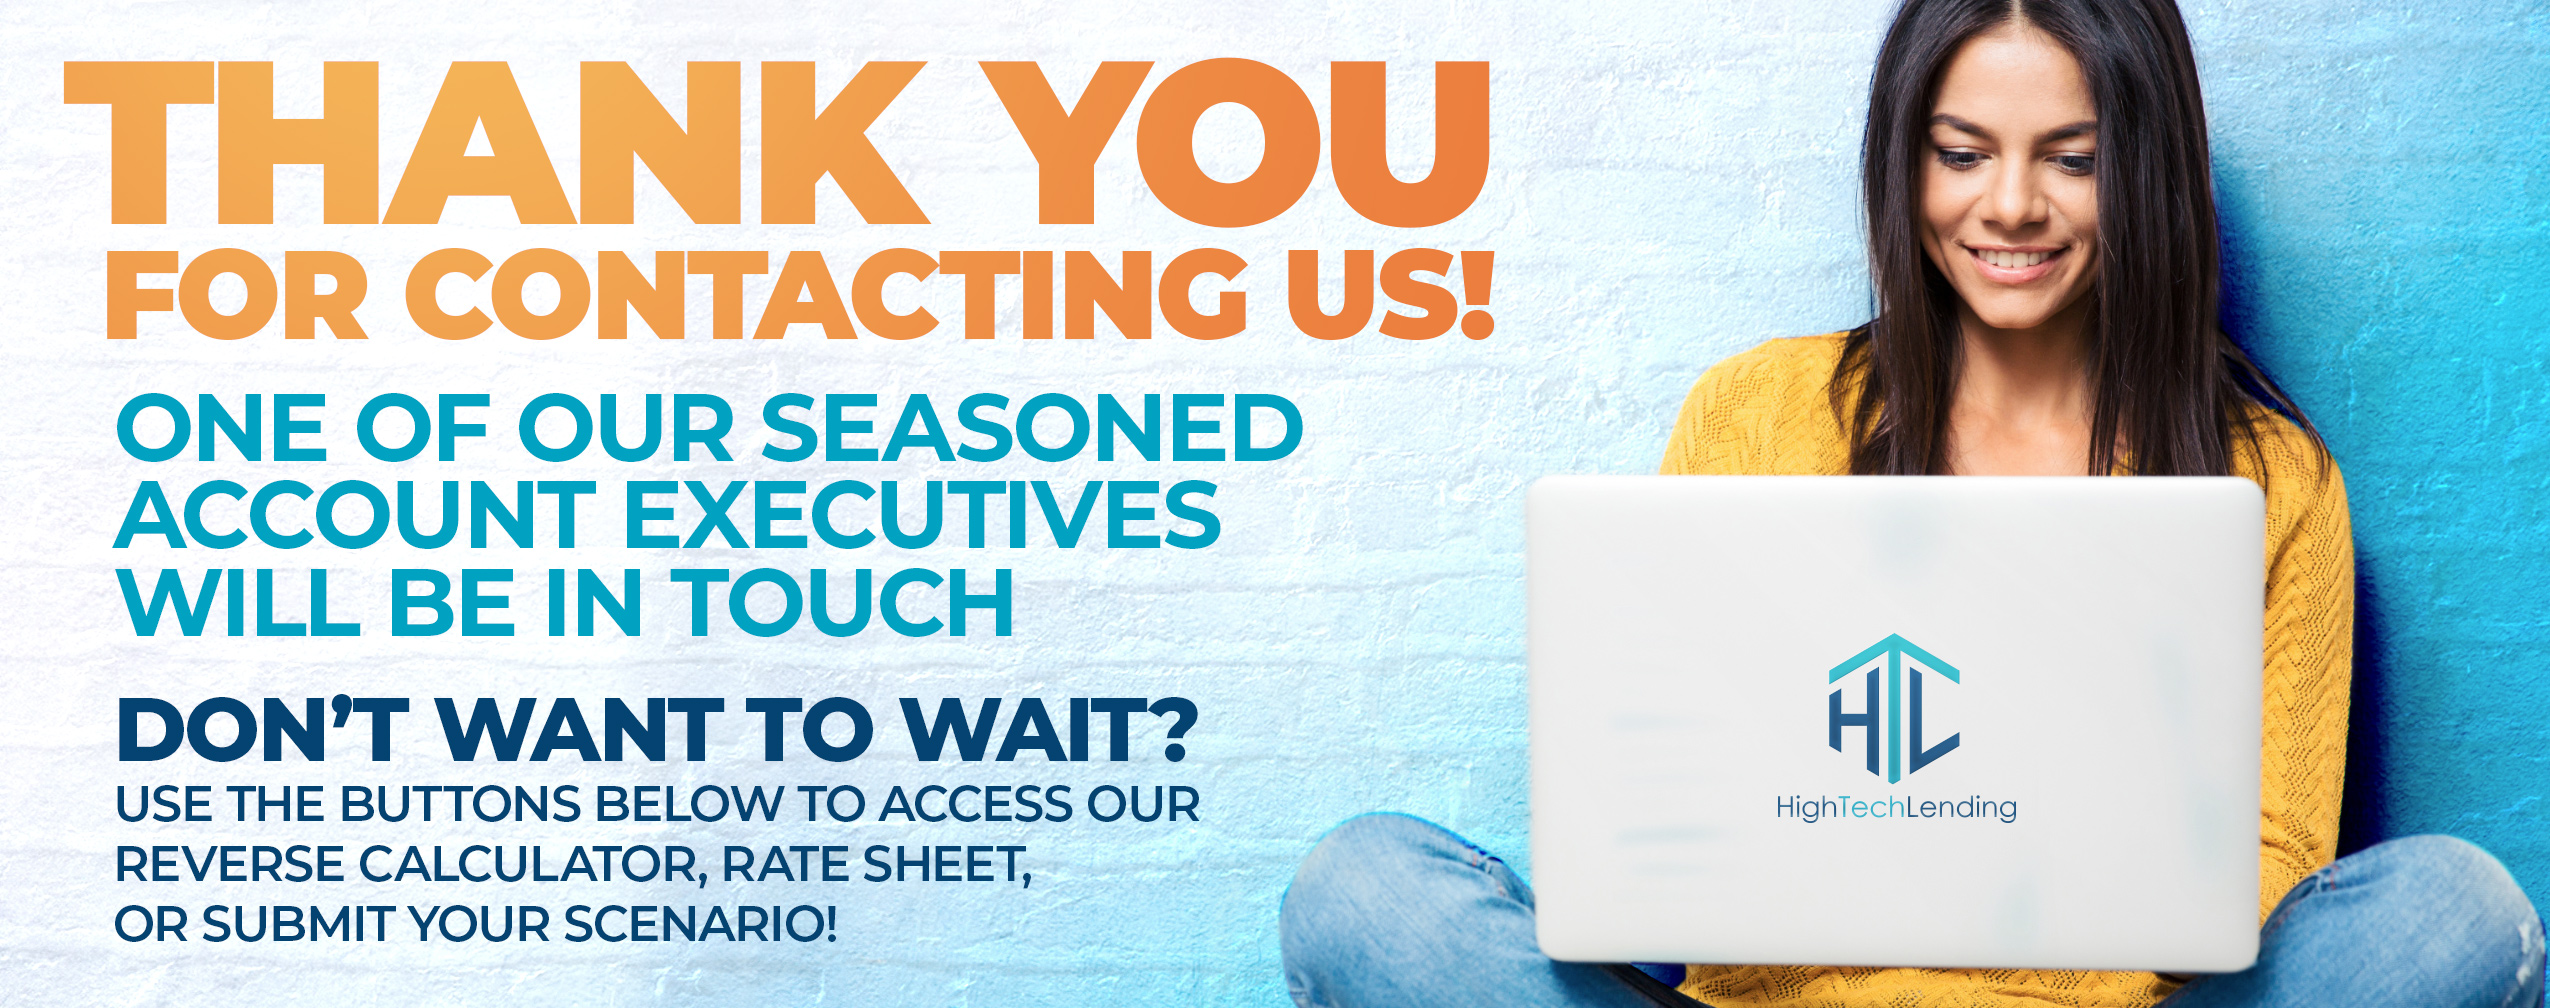 Thank You for Contacting Us! One of our seasoned account executives will be in touch!